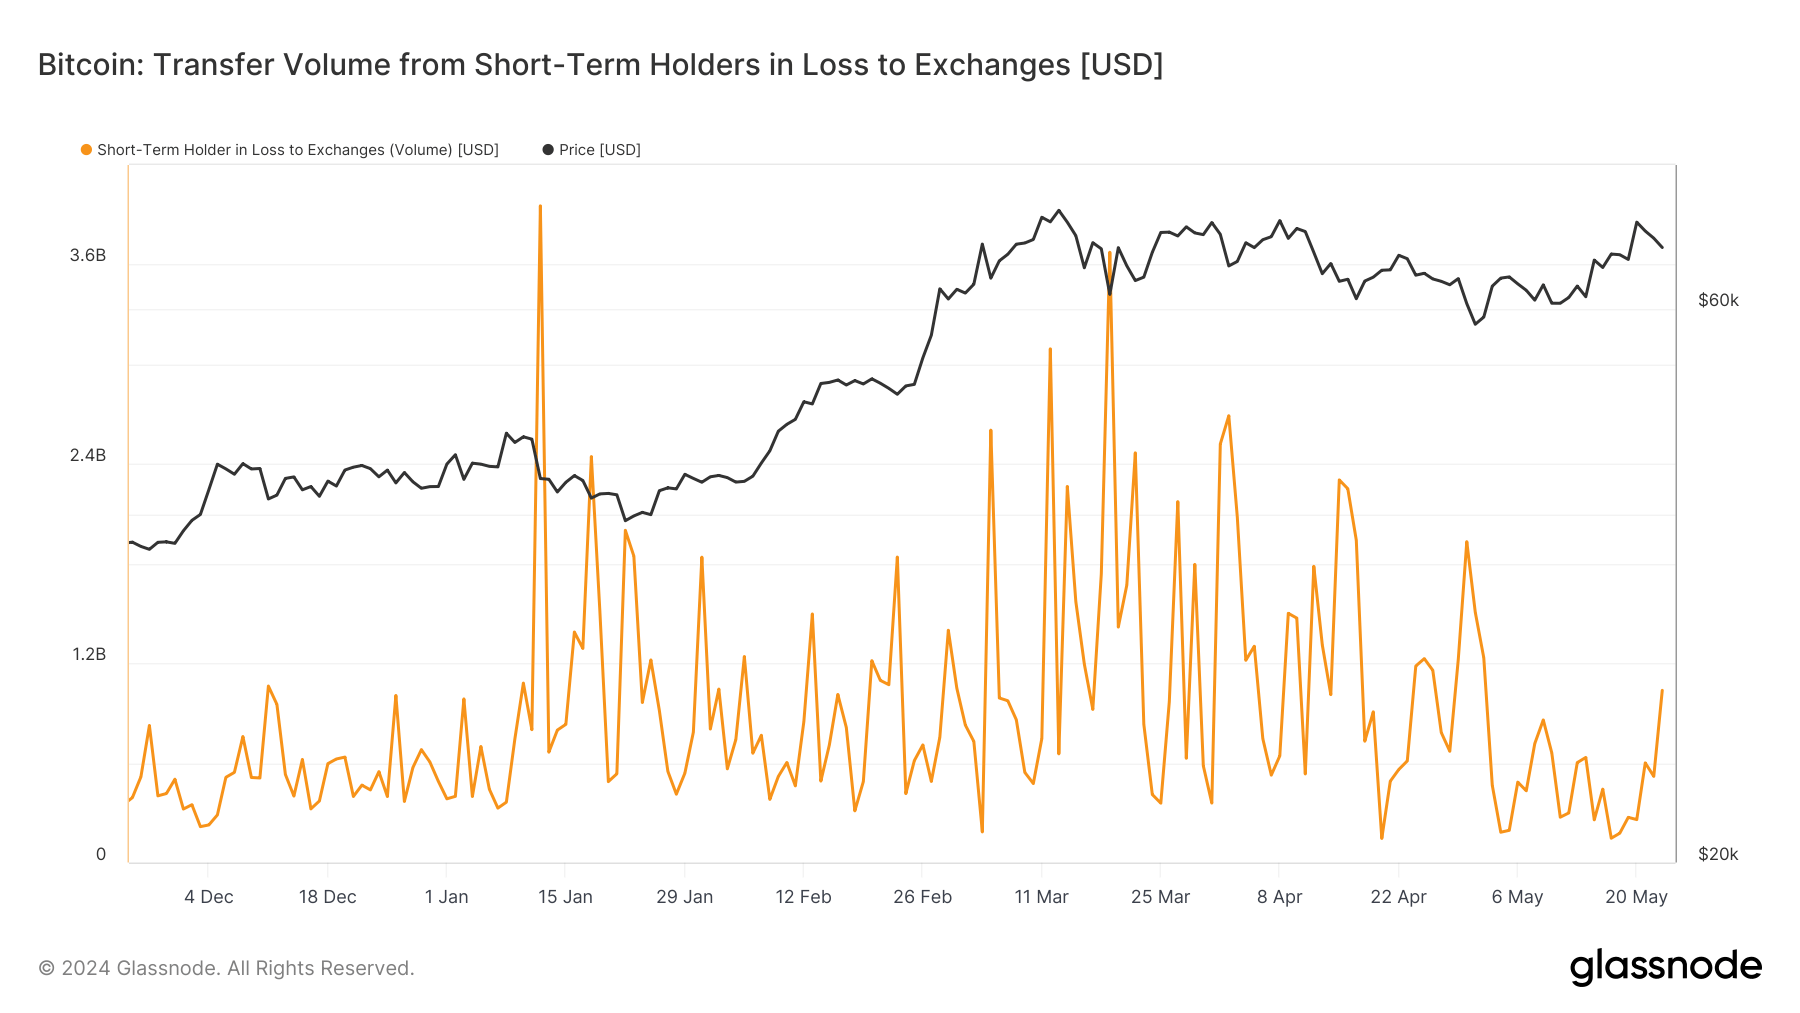 Transfer Volume from Short-Term Holders in loss to exchanges: (Source: Glassnode)